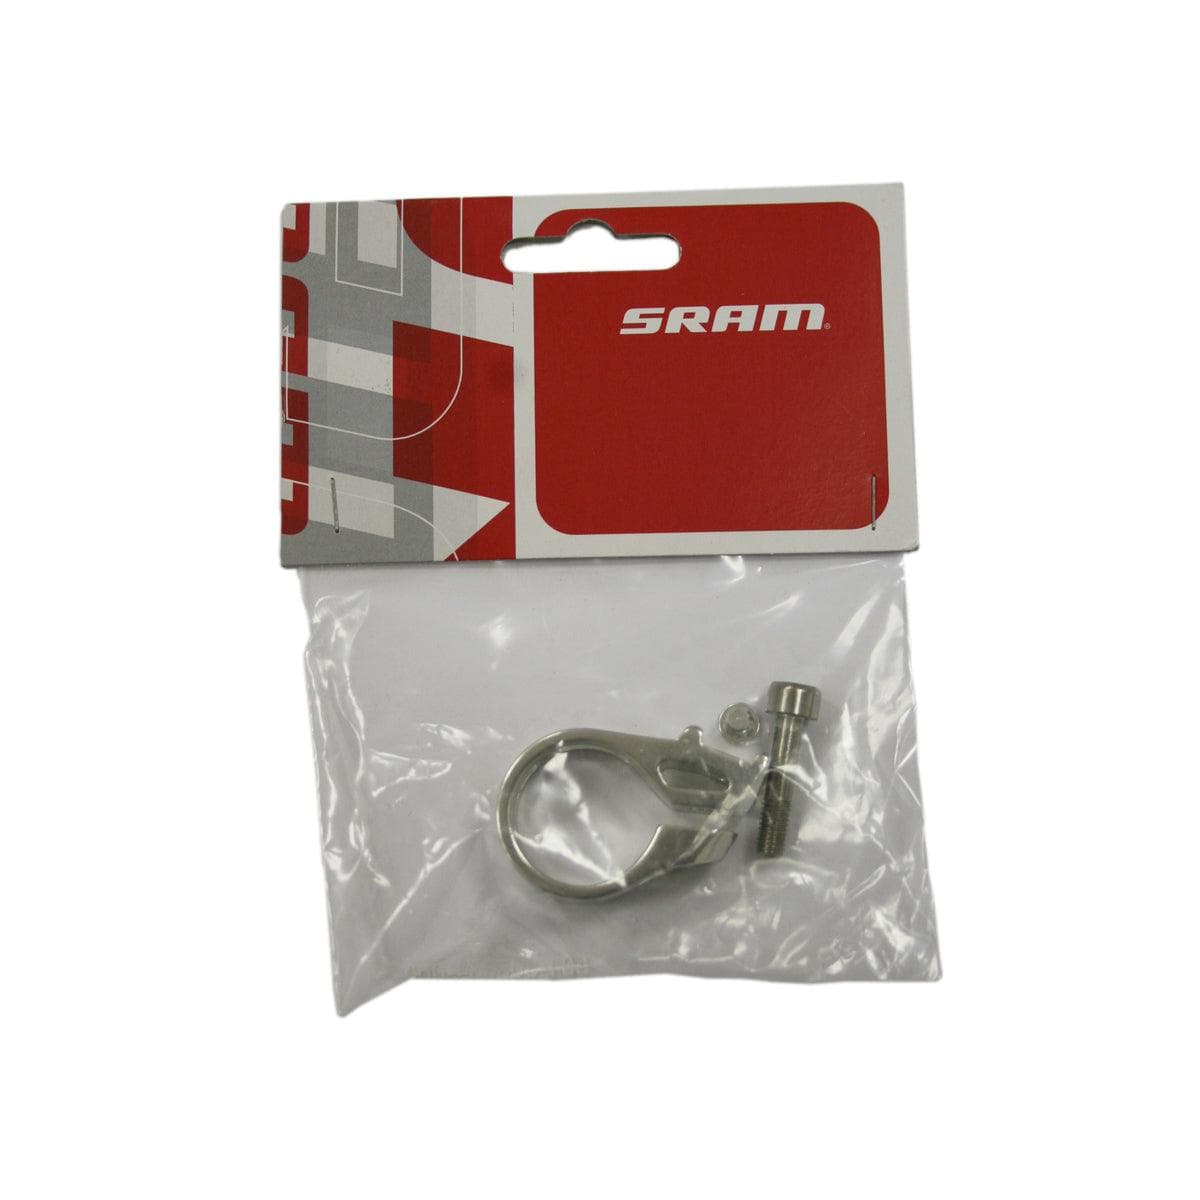 Sram Spare - Shift Lever Trigger Clamp/Bolt Kit 07-09 X0/X9/X7, Qty 1: